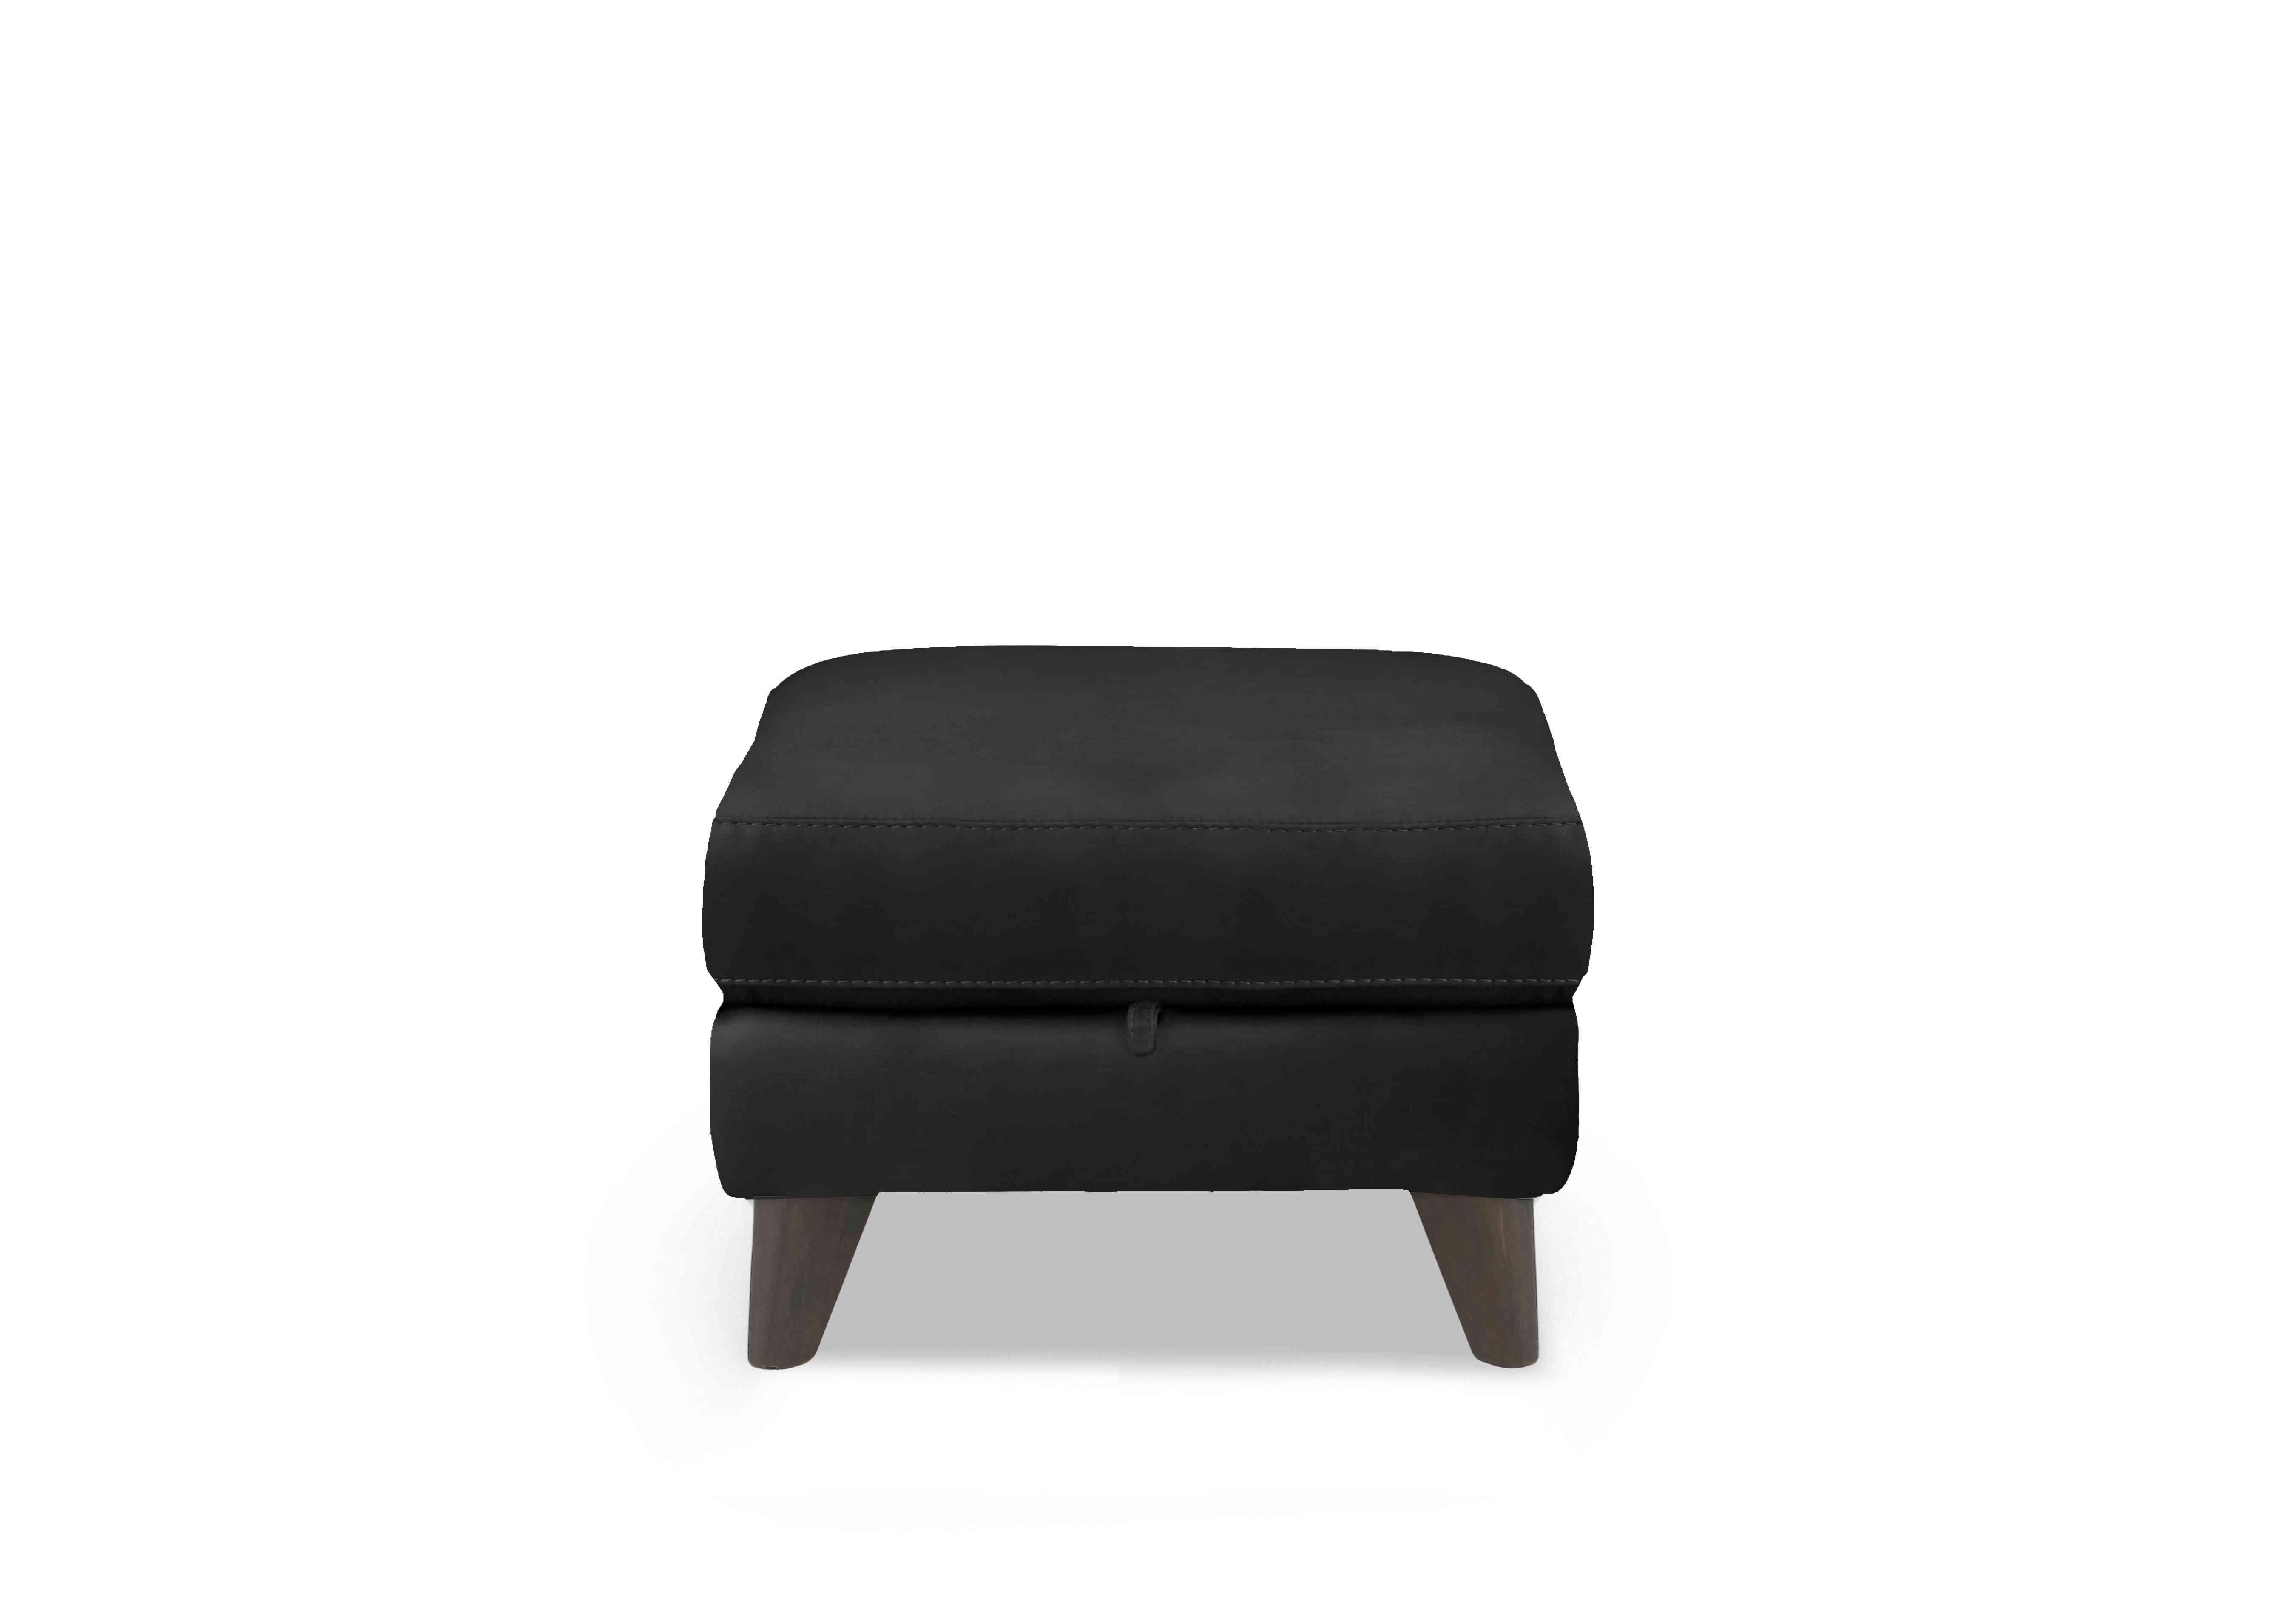 Wade Leather Storage Footstool in Bv-3500 Classic Black on Furniture Village